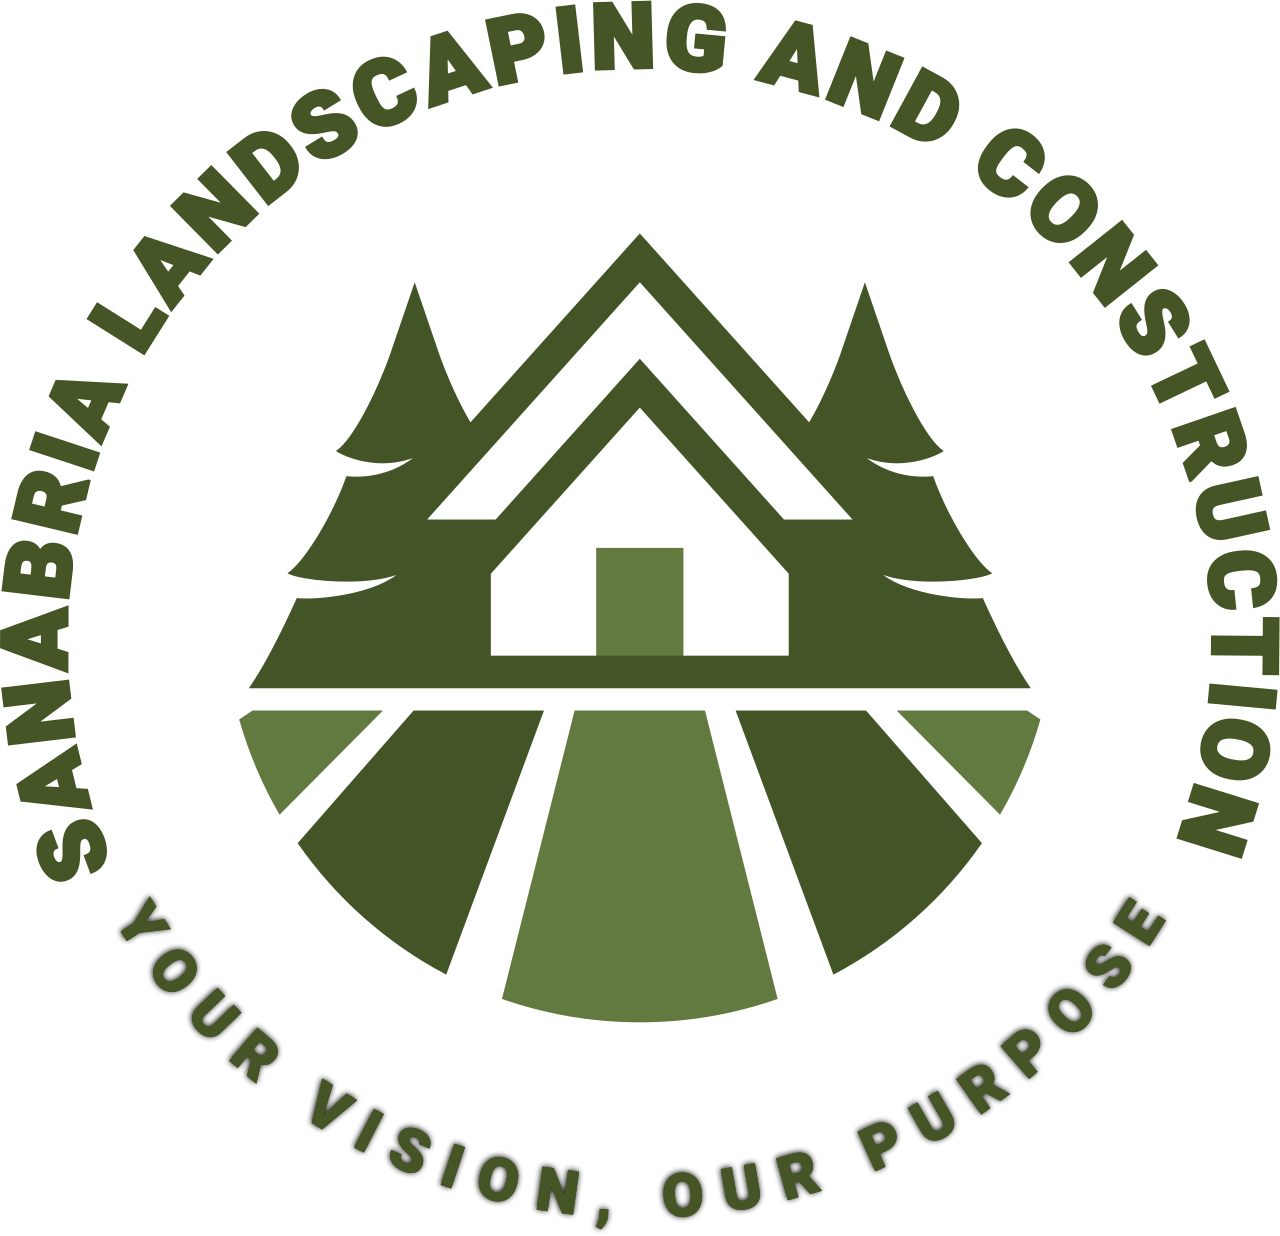 SANABRIA LANDSCAPING AND CONSTRUCTION 's logo